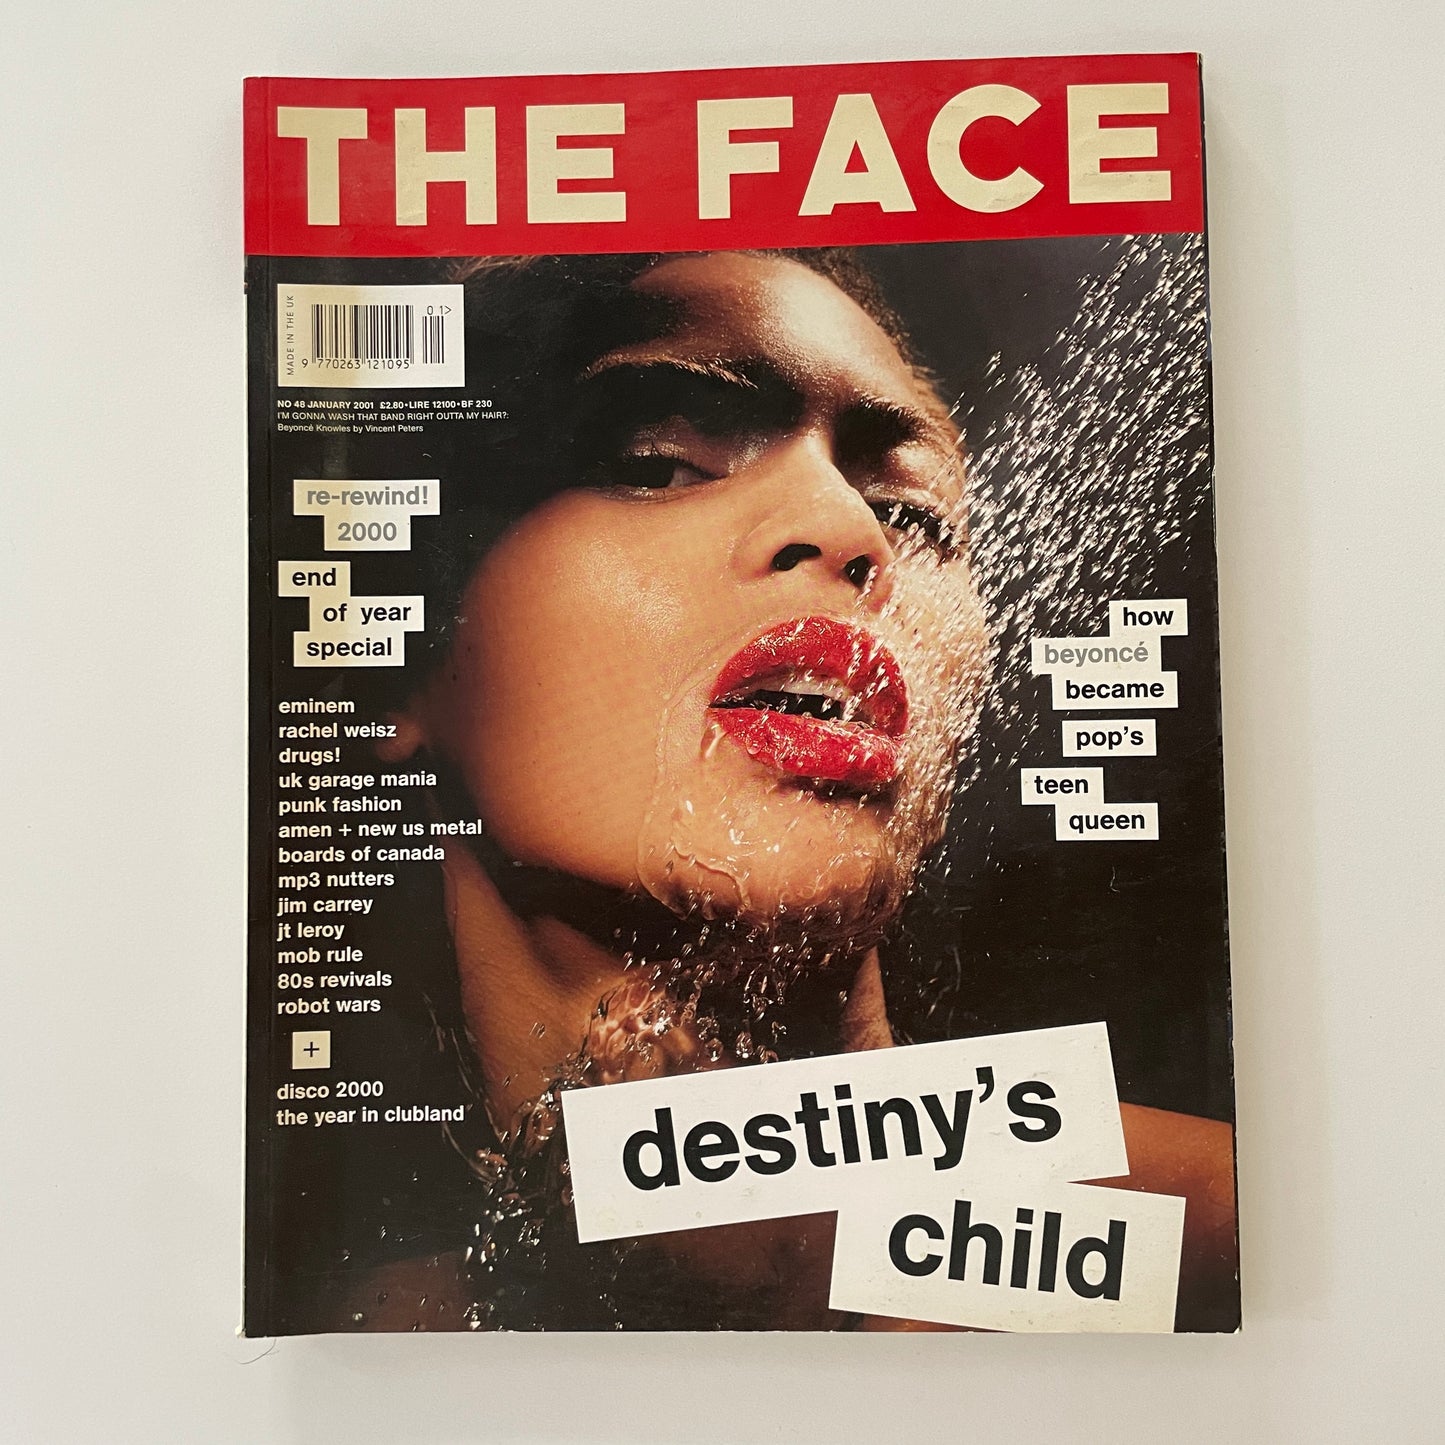 The Face No.48 - January 2001 - Beyonce